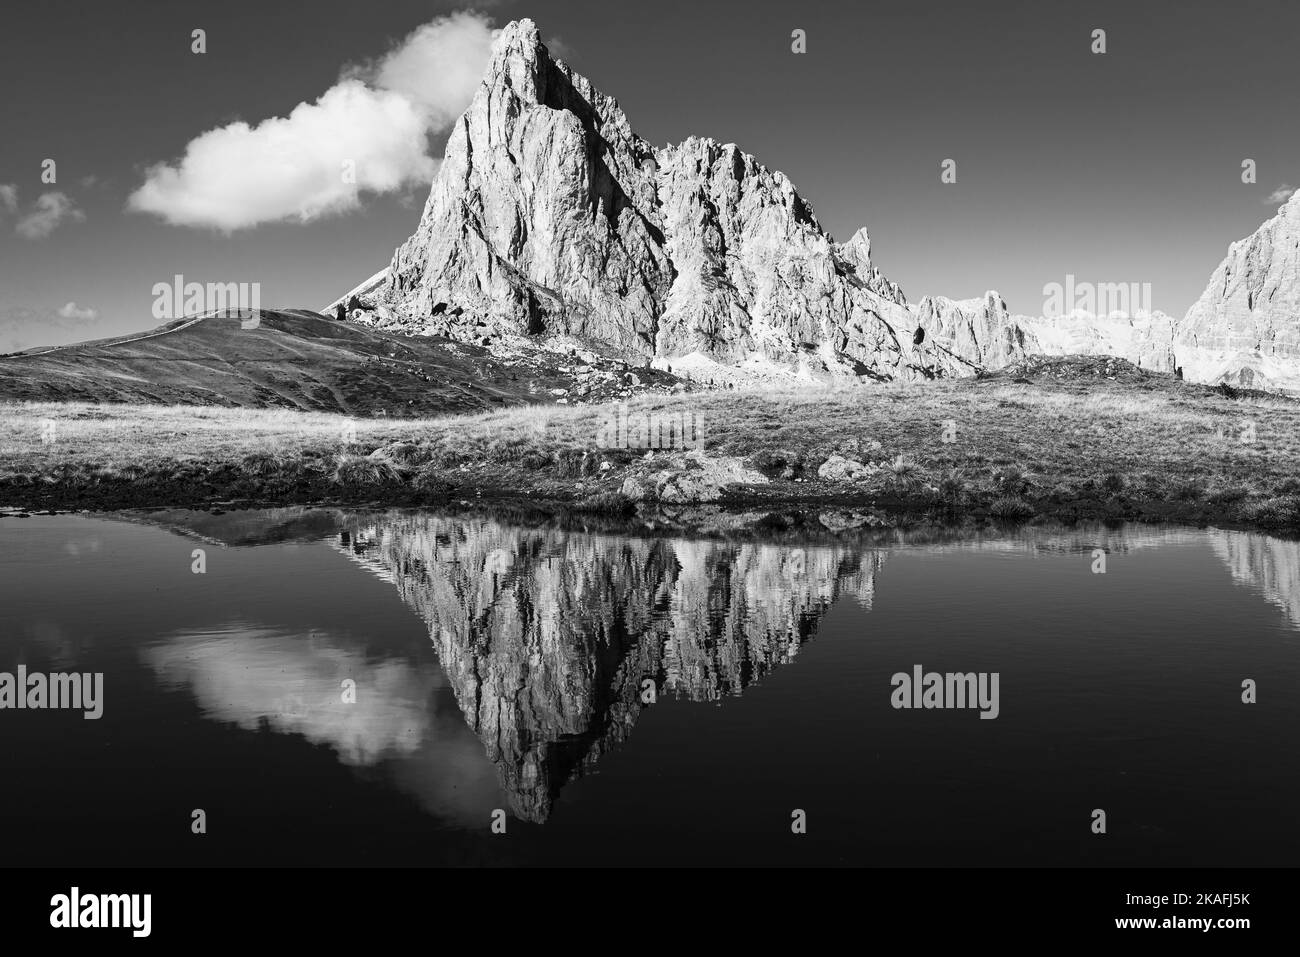 The rock face of Mount Ragusela reflected in the water of a mountain lake on the autumnal Passo di Giau, Dolomites, Italy Stock Photo